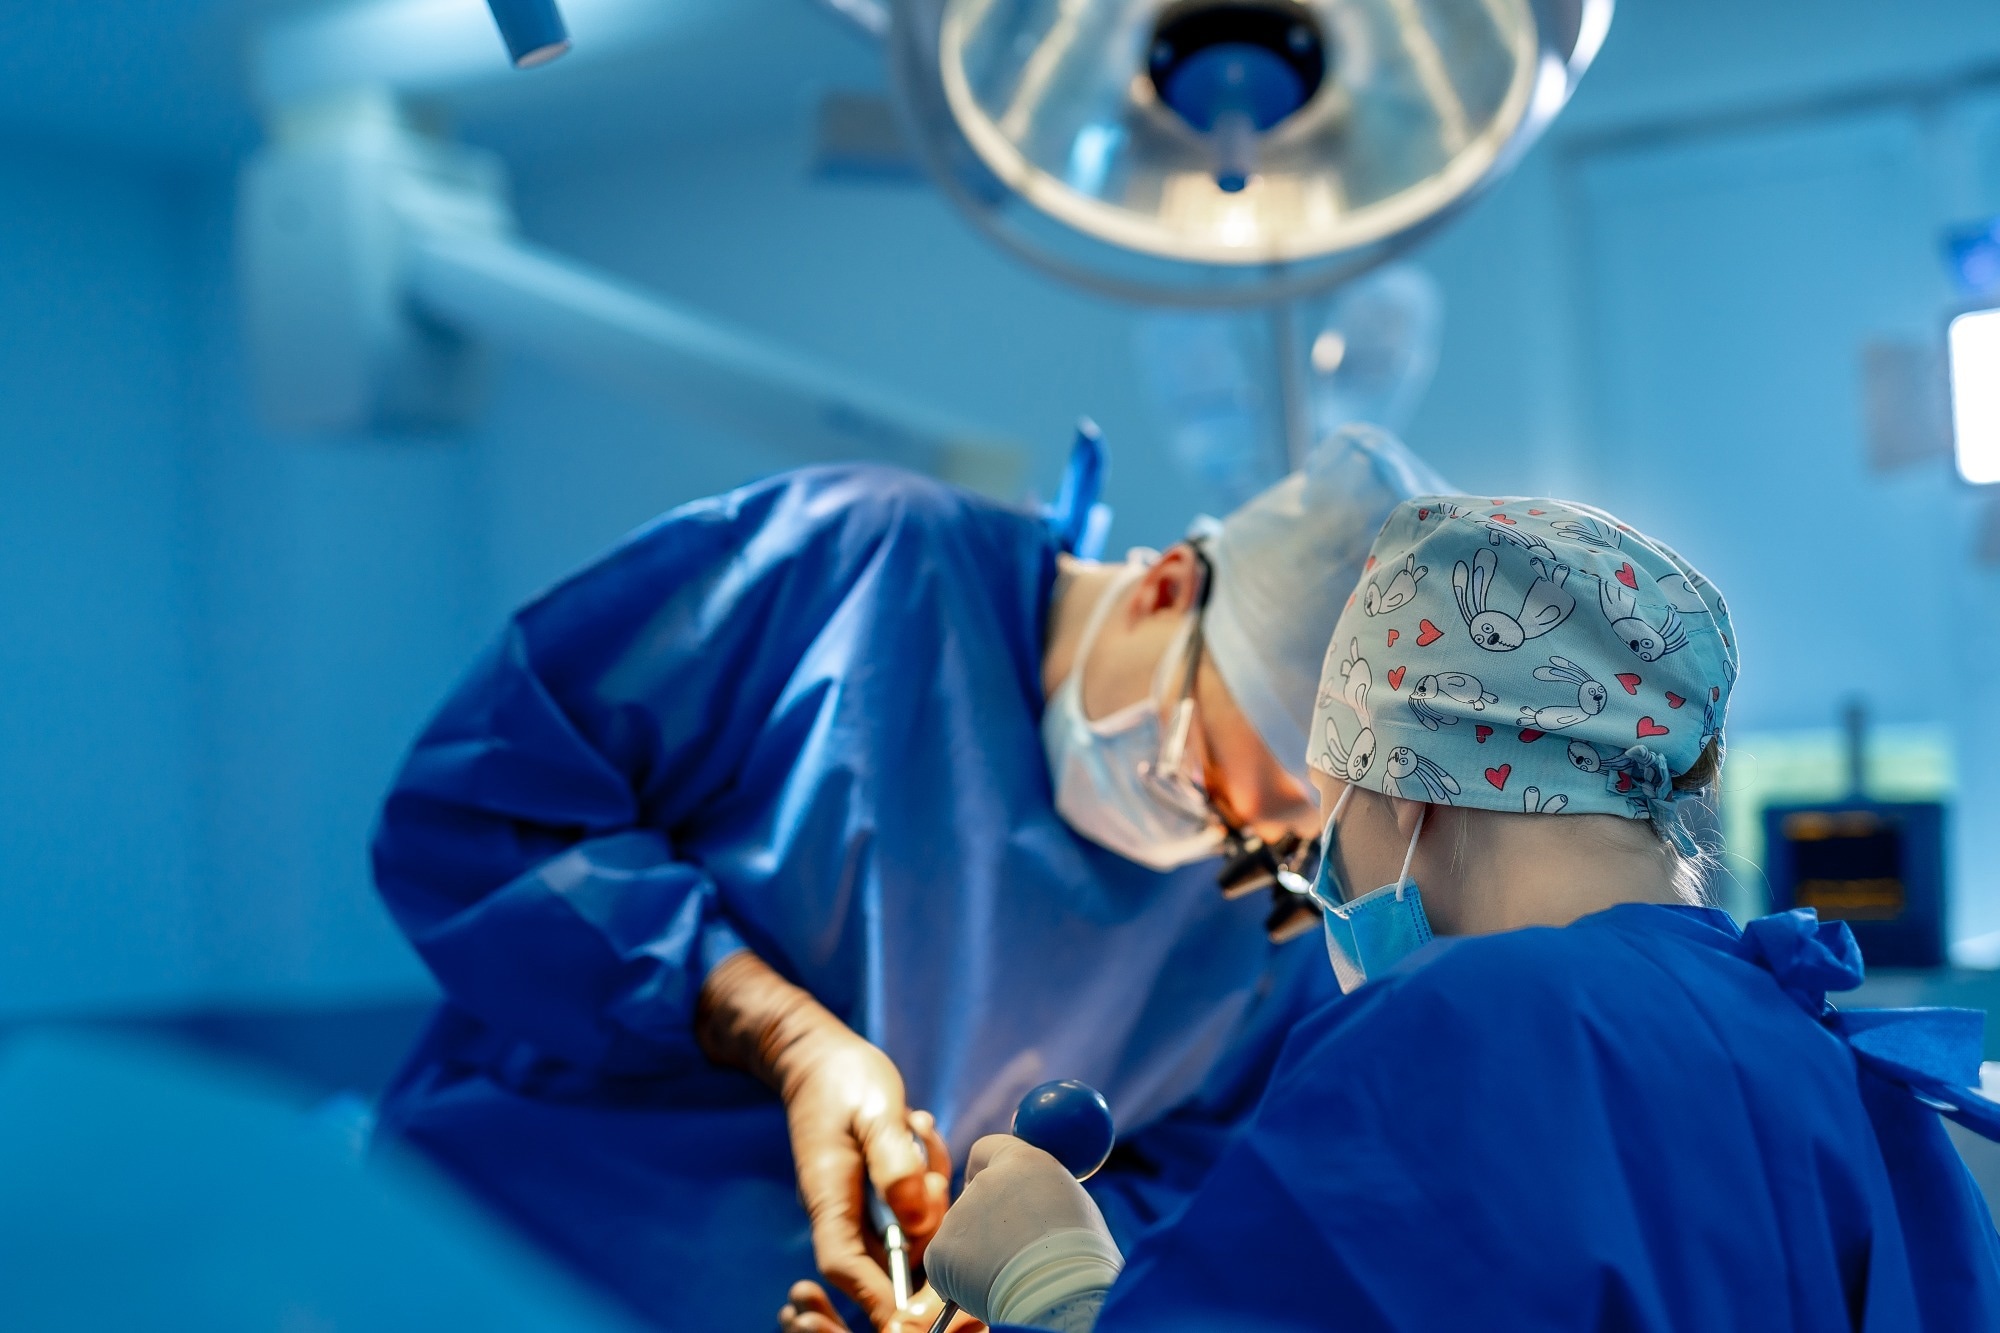 Study: Long-Term Outcomes of Medical Management vs Bariatric Surgery in Type 2 Diabetes. Image Credit: Terelyuk / Shutterstock